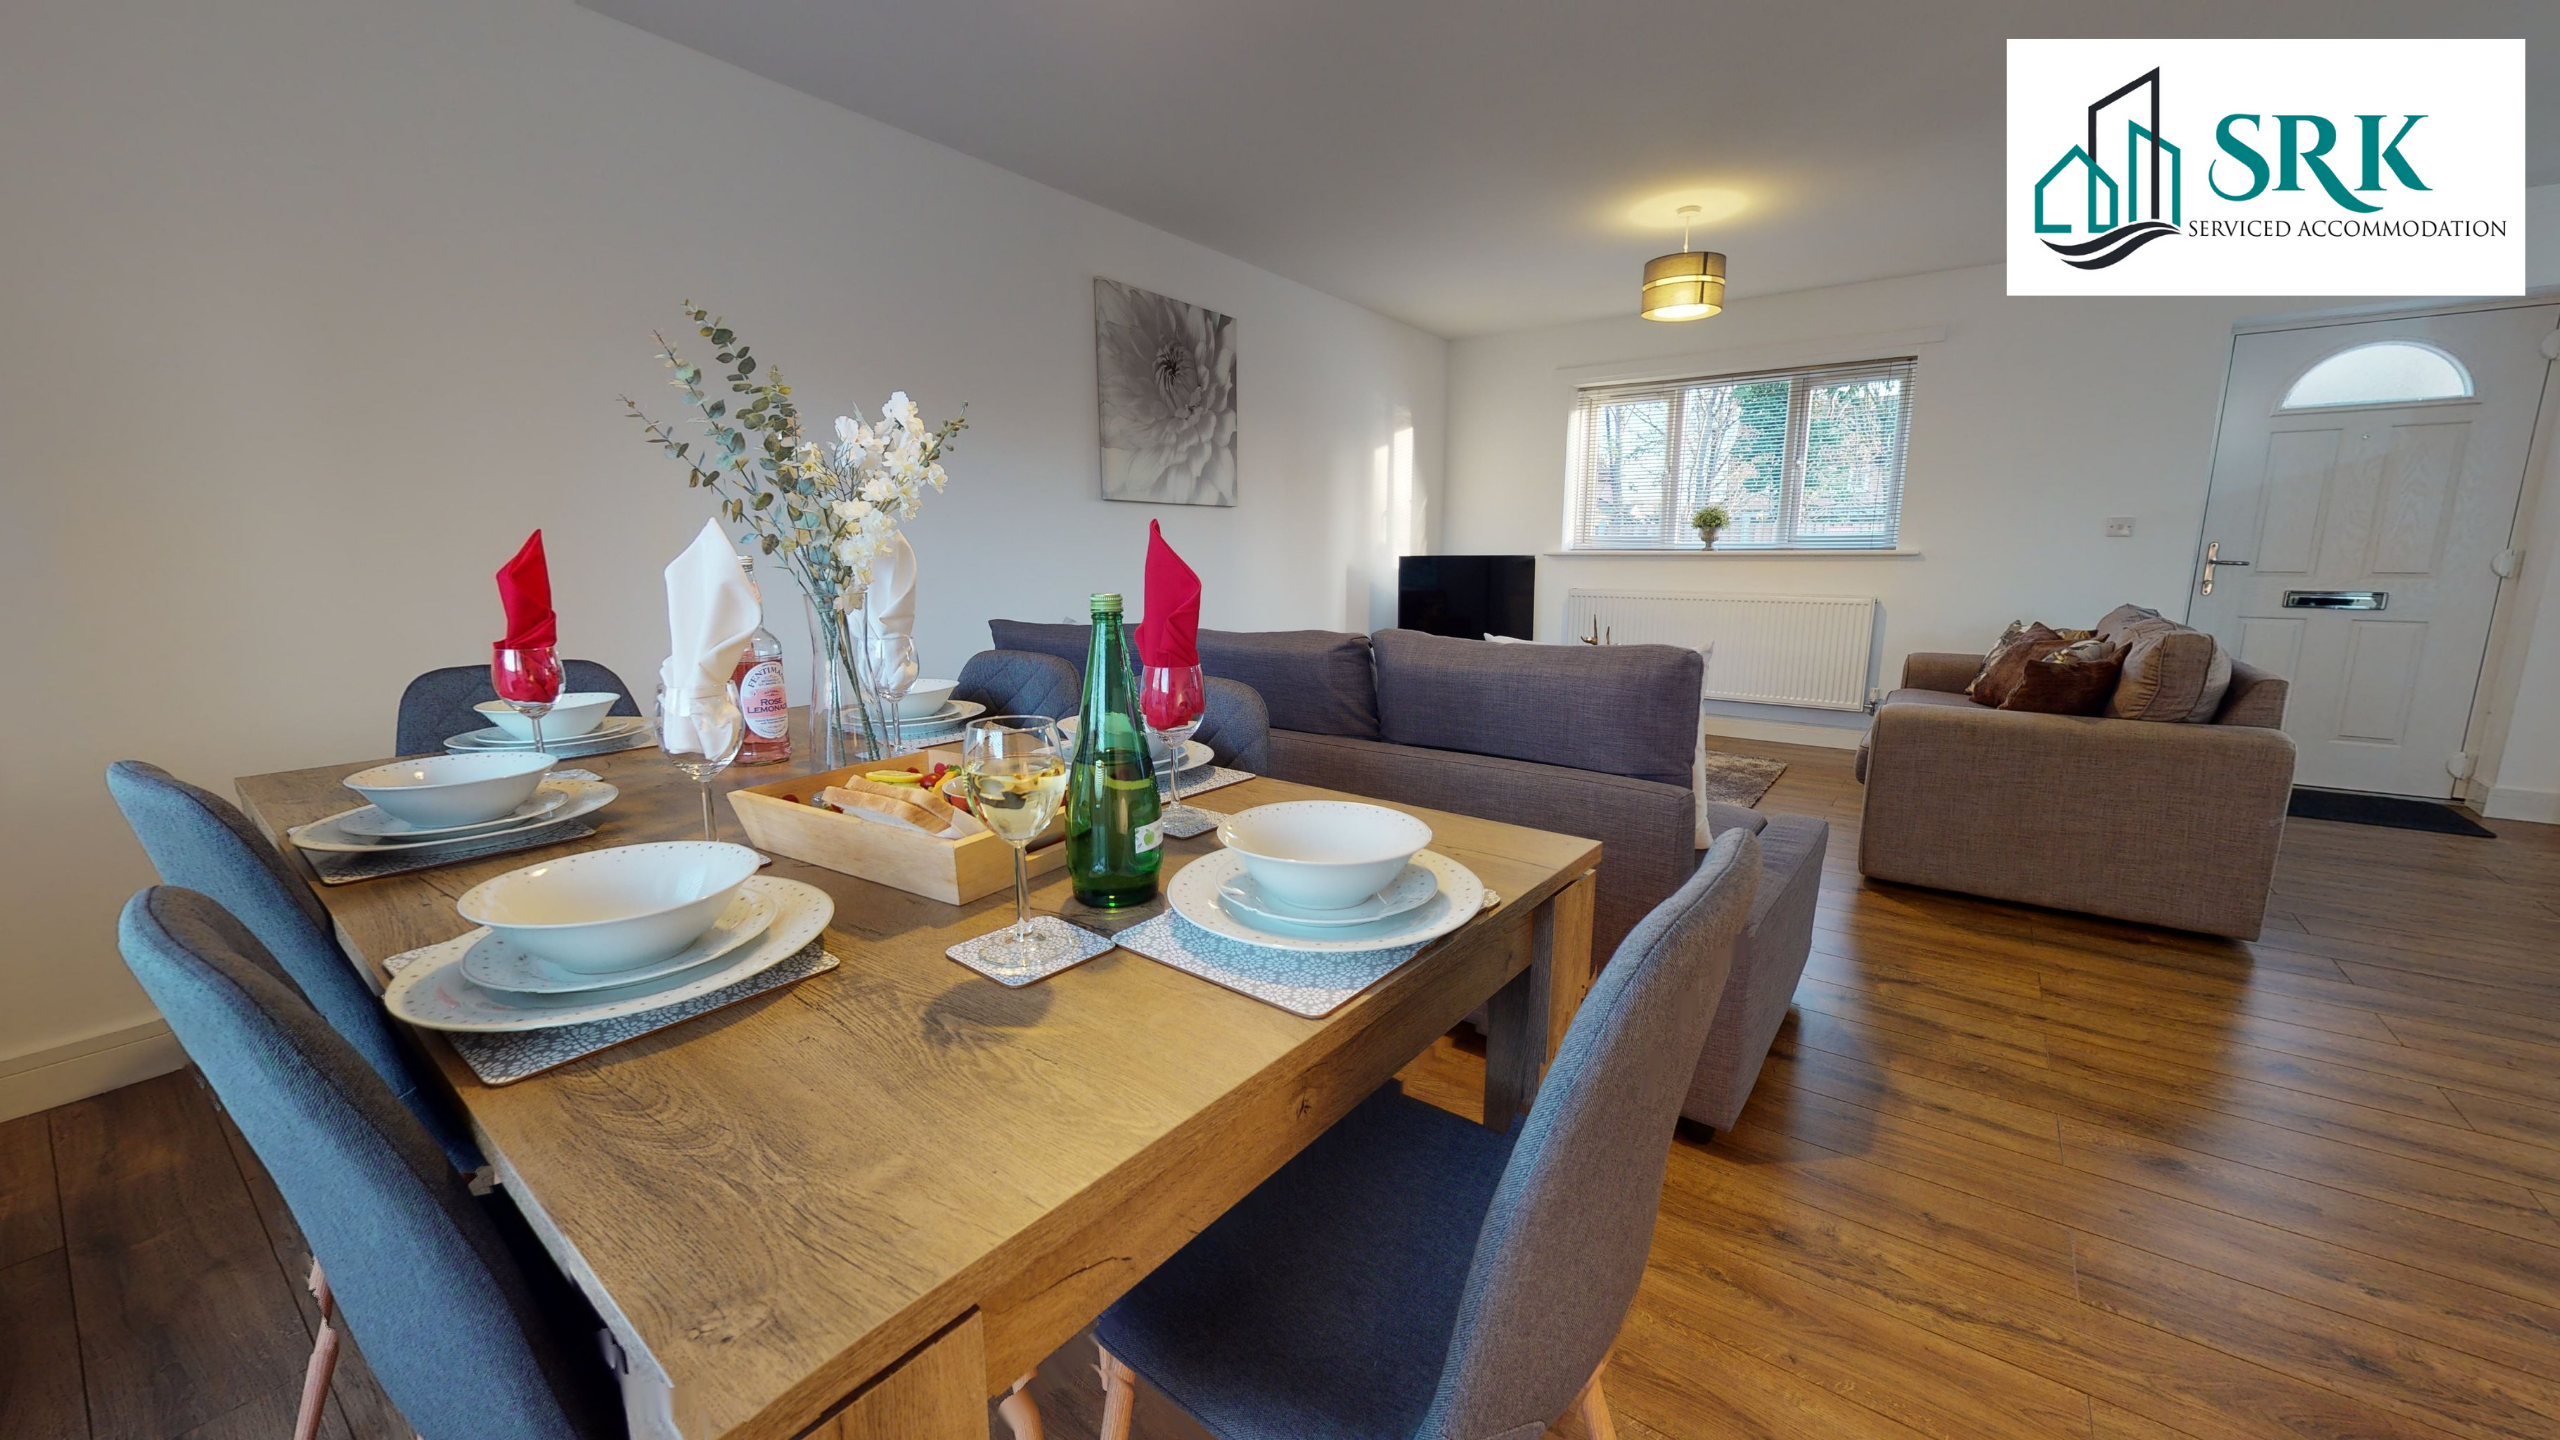 Get Luxury Corporate Lodging At This Peterborough, UK Serviced Apartments